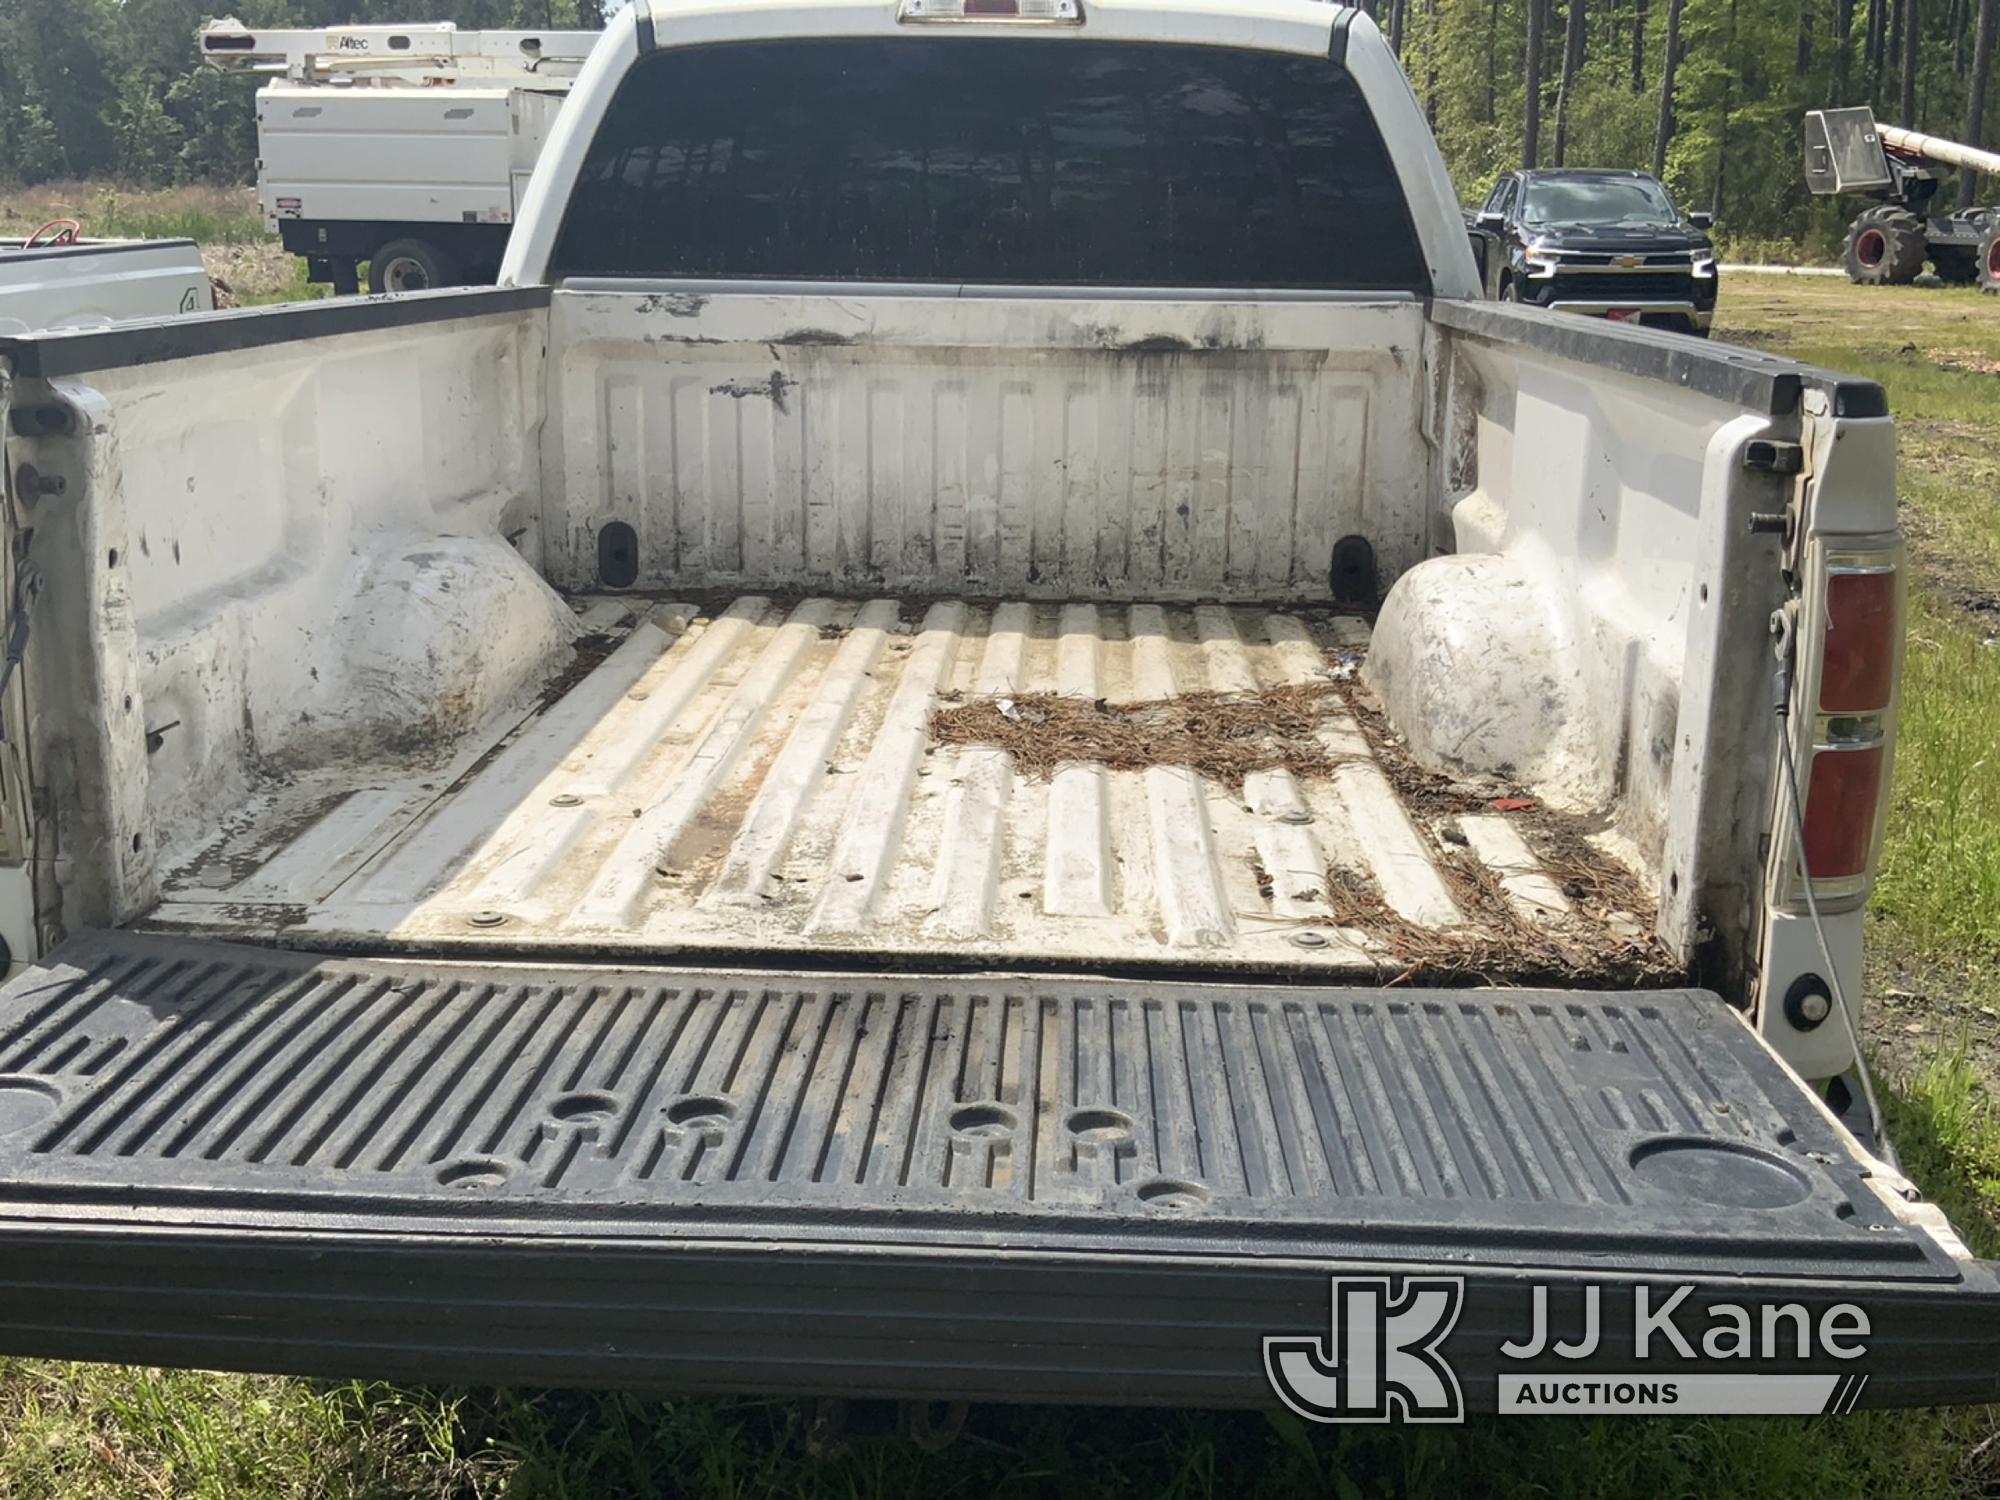 (Ridgeland, SC) 2014 Ford F150 4x4 Extended-Cab Pickup Truck Runs Rough, Does Not Move, Will Not Sta